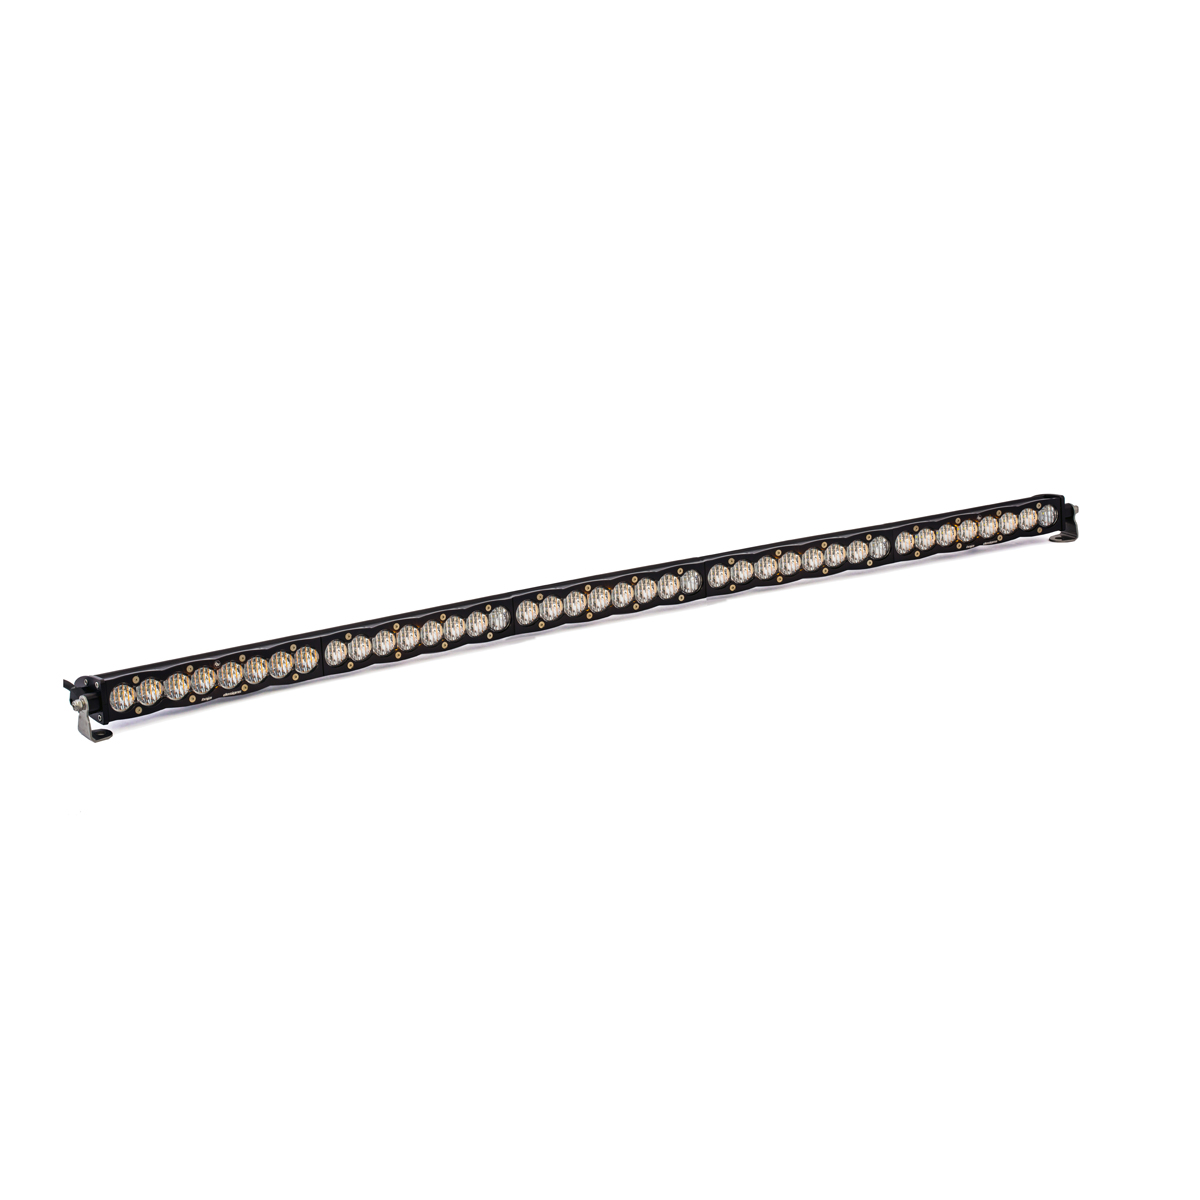 Baja Designs 50 Inch LED Light Bar Wide Driving Pattern S8 Series - Click Image to Close